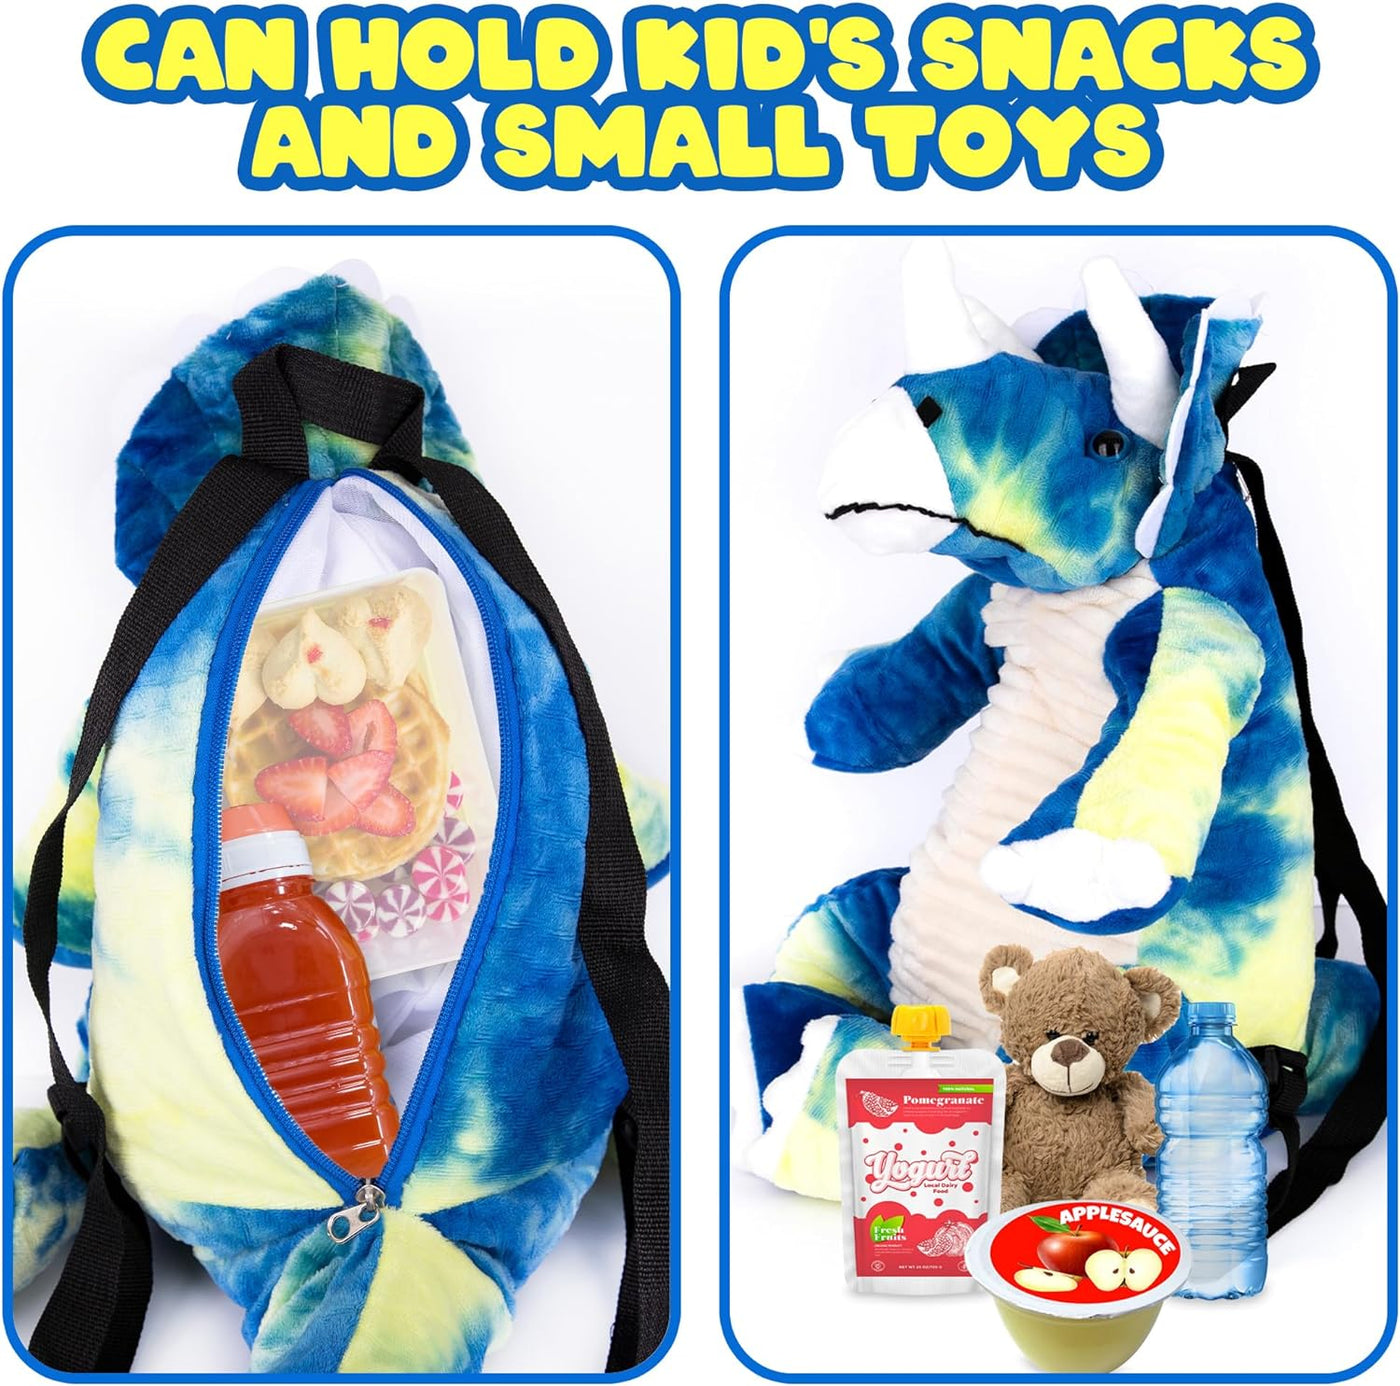 ArtCreativity Plush Dinosaur Backpack, 22" Stuffed Animal Backpack in the Shape of a Triceratops, Plushie Dinosaur Backpack for Toddlers, Blue and Yellow tie dye Colors. Adjustable Nylon Straps